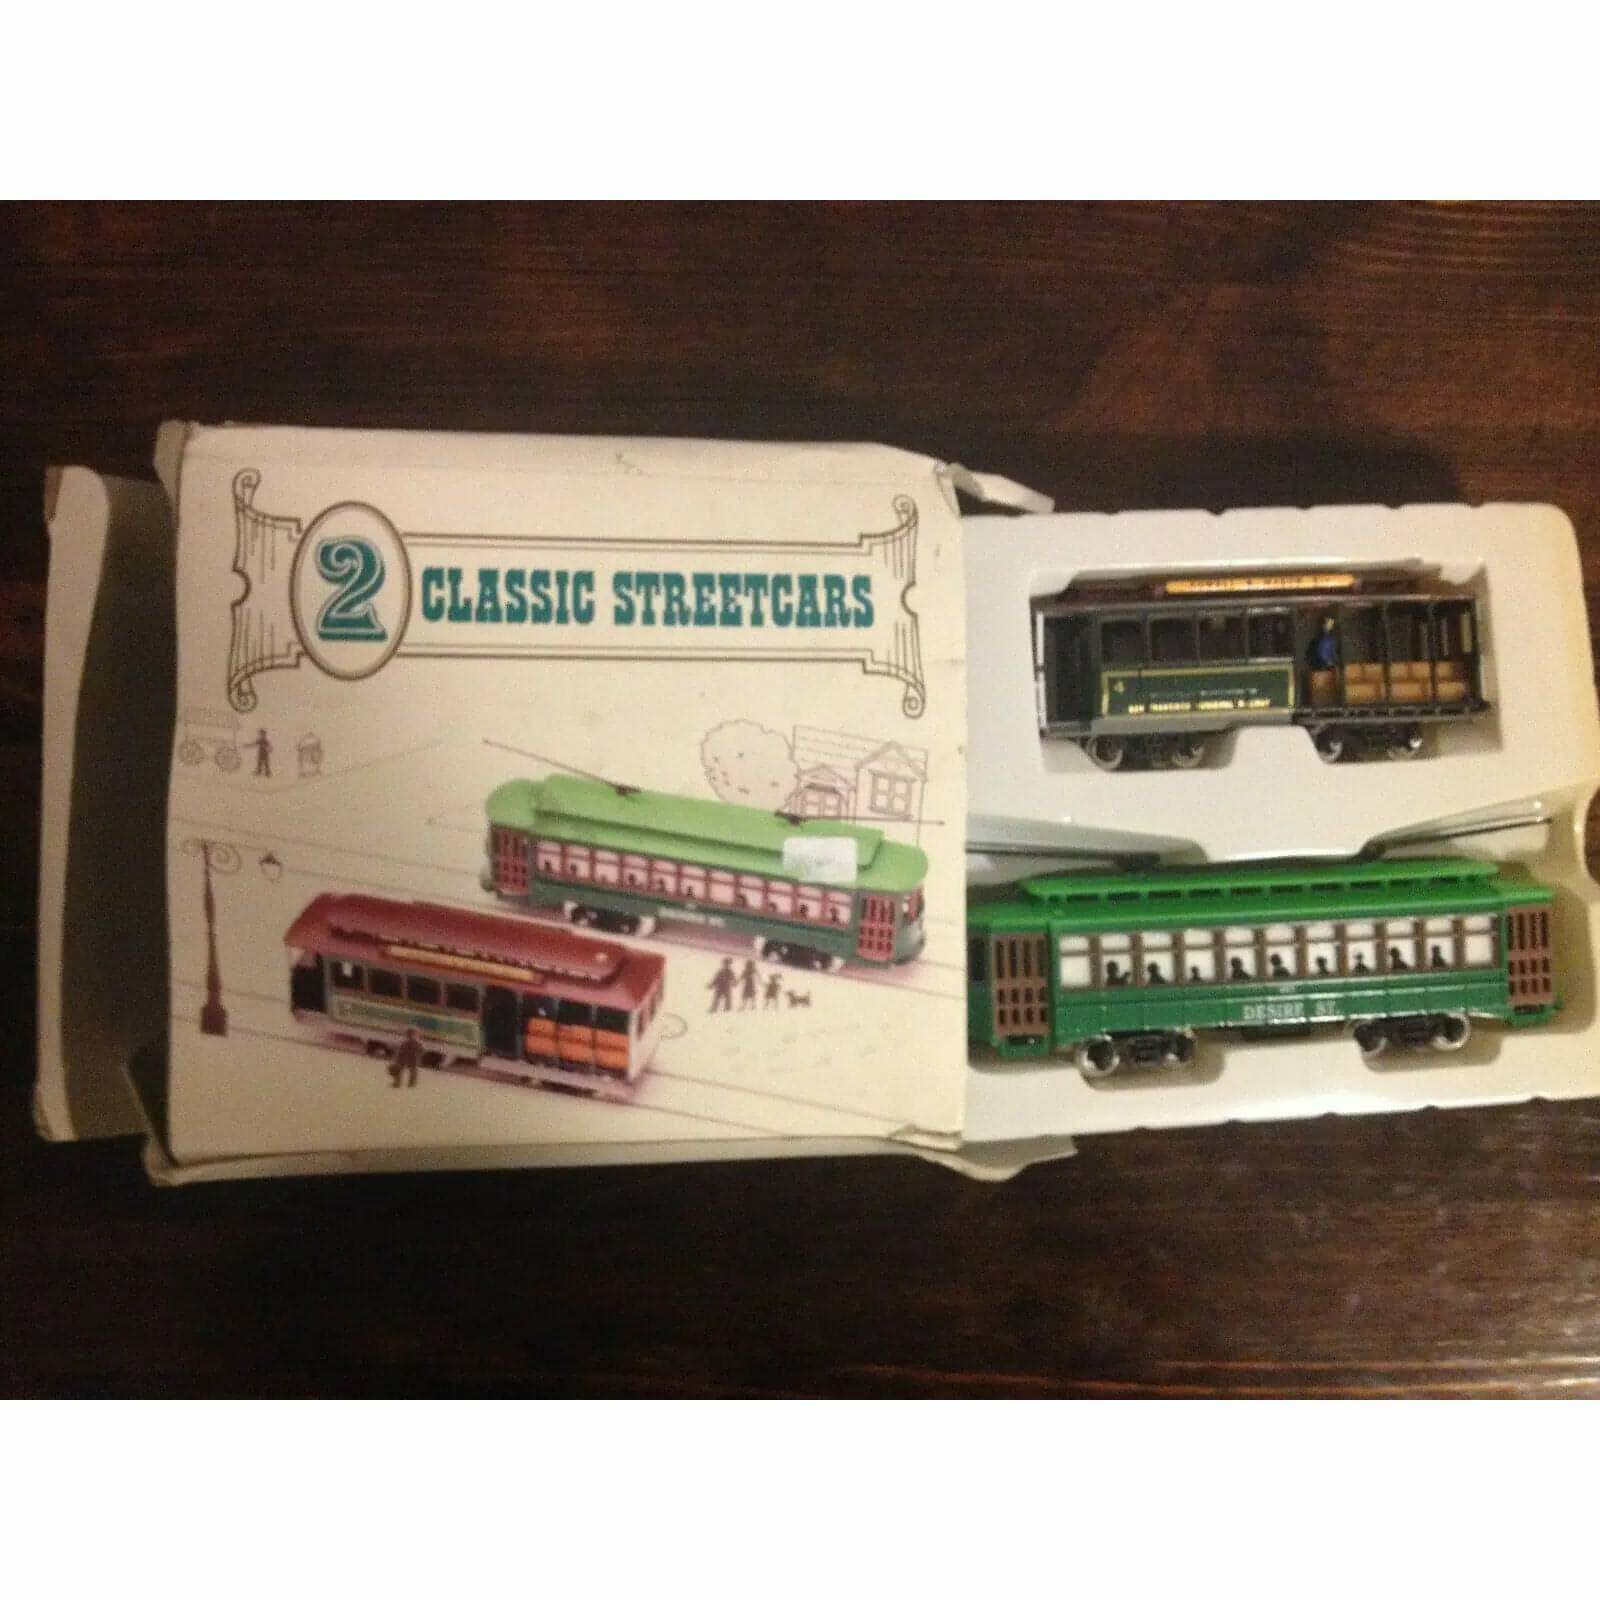 Two Classic Street Cars: HO Gauge [Toy Train Car] BooksCardsNBikes